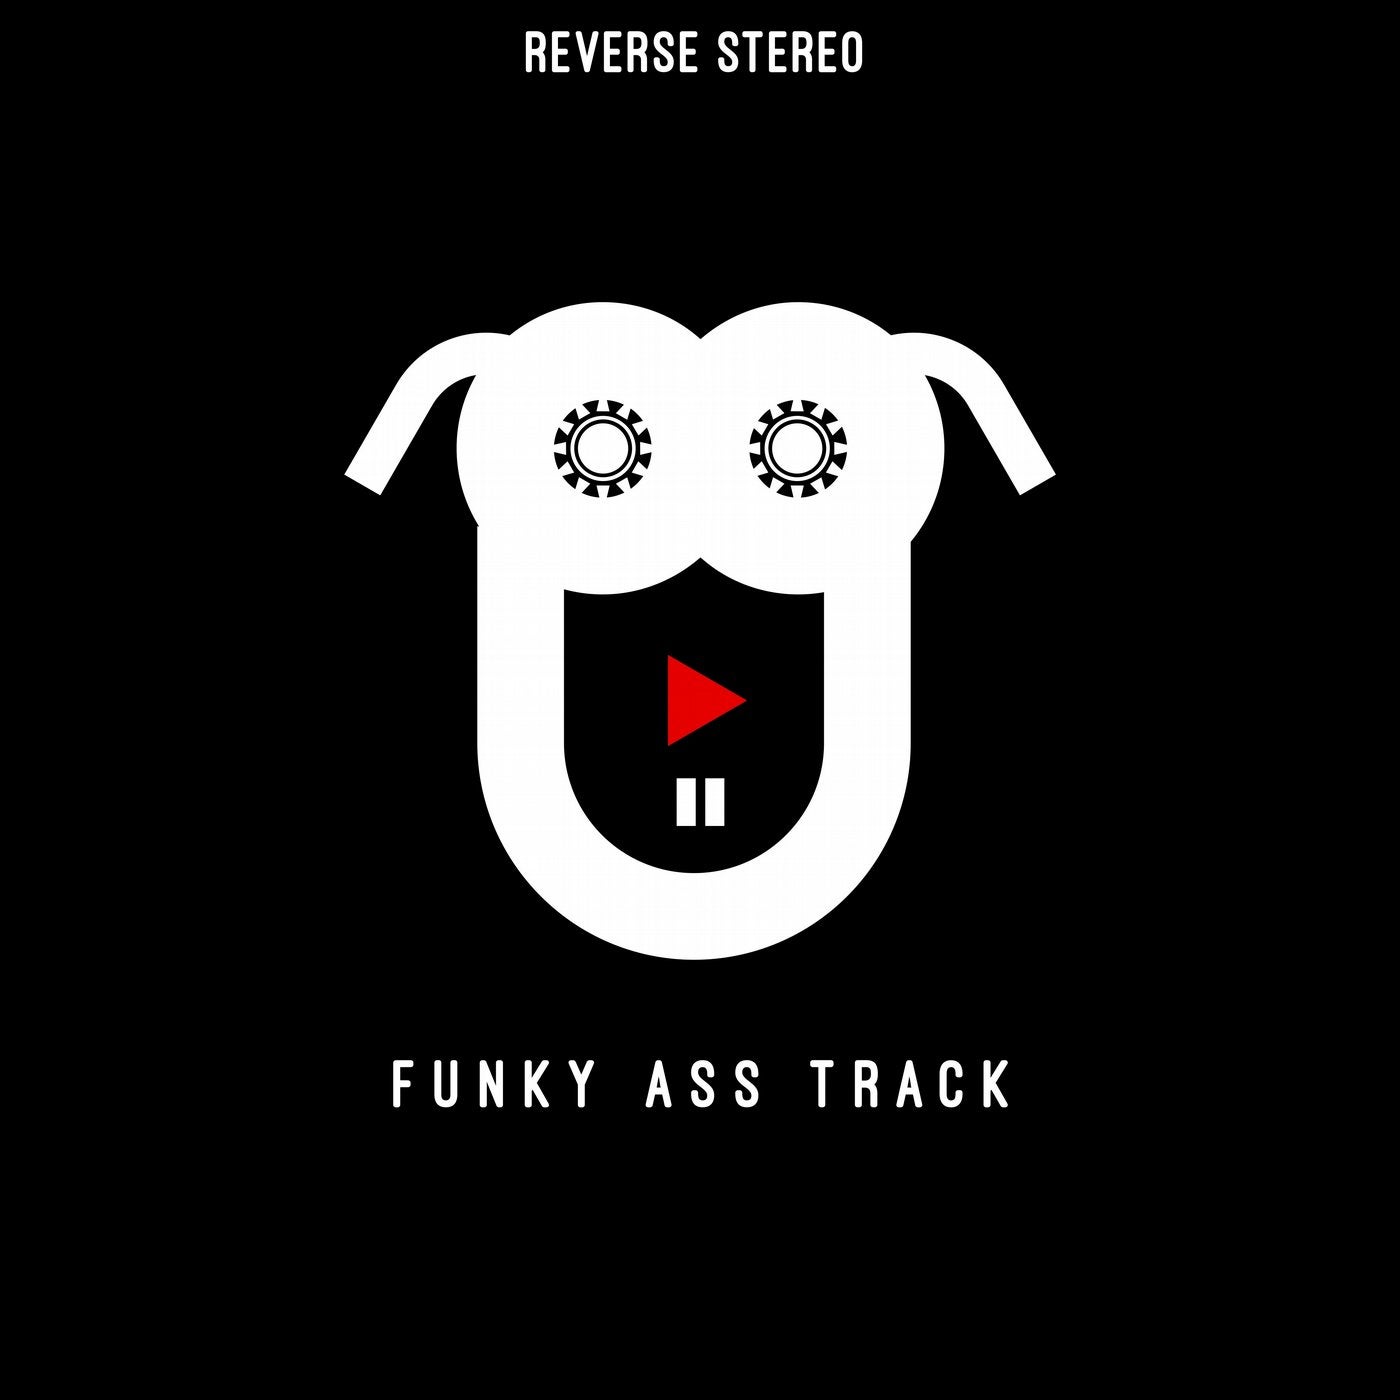 Funky Ass Track